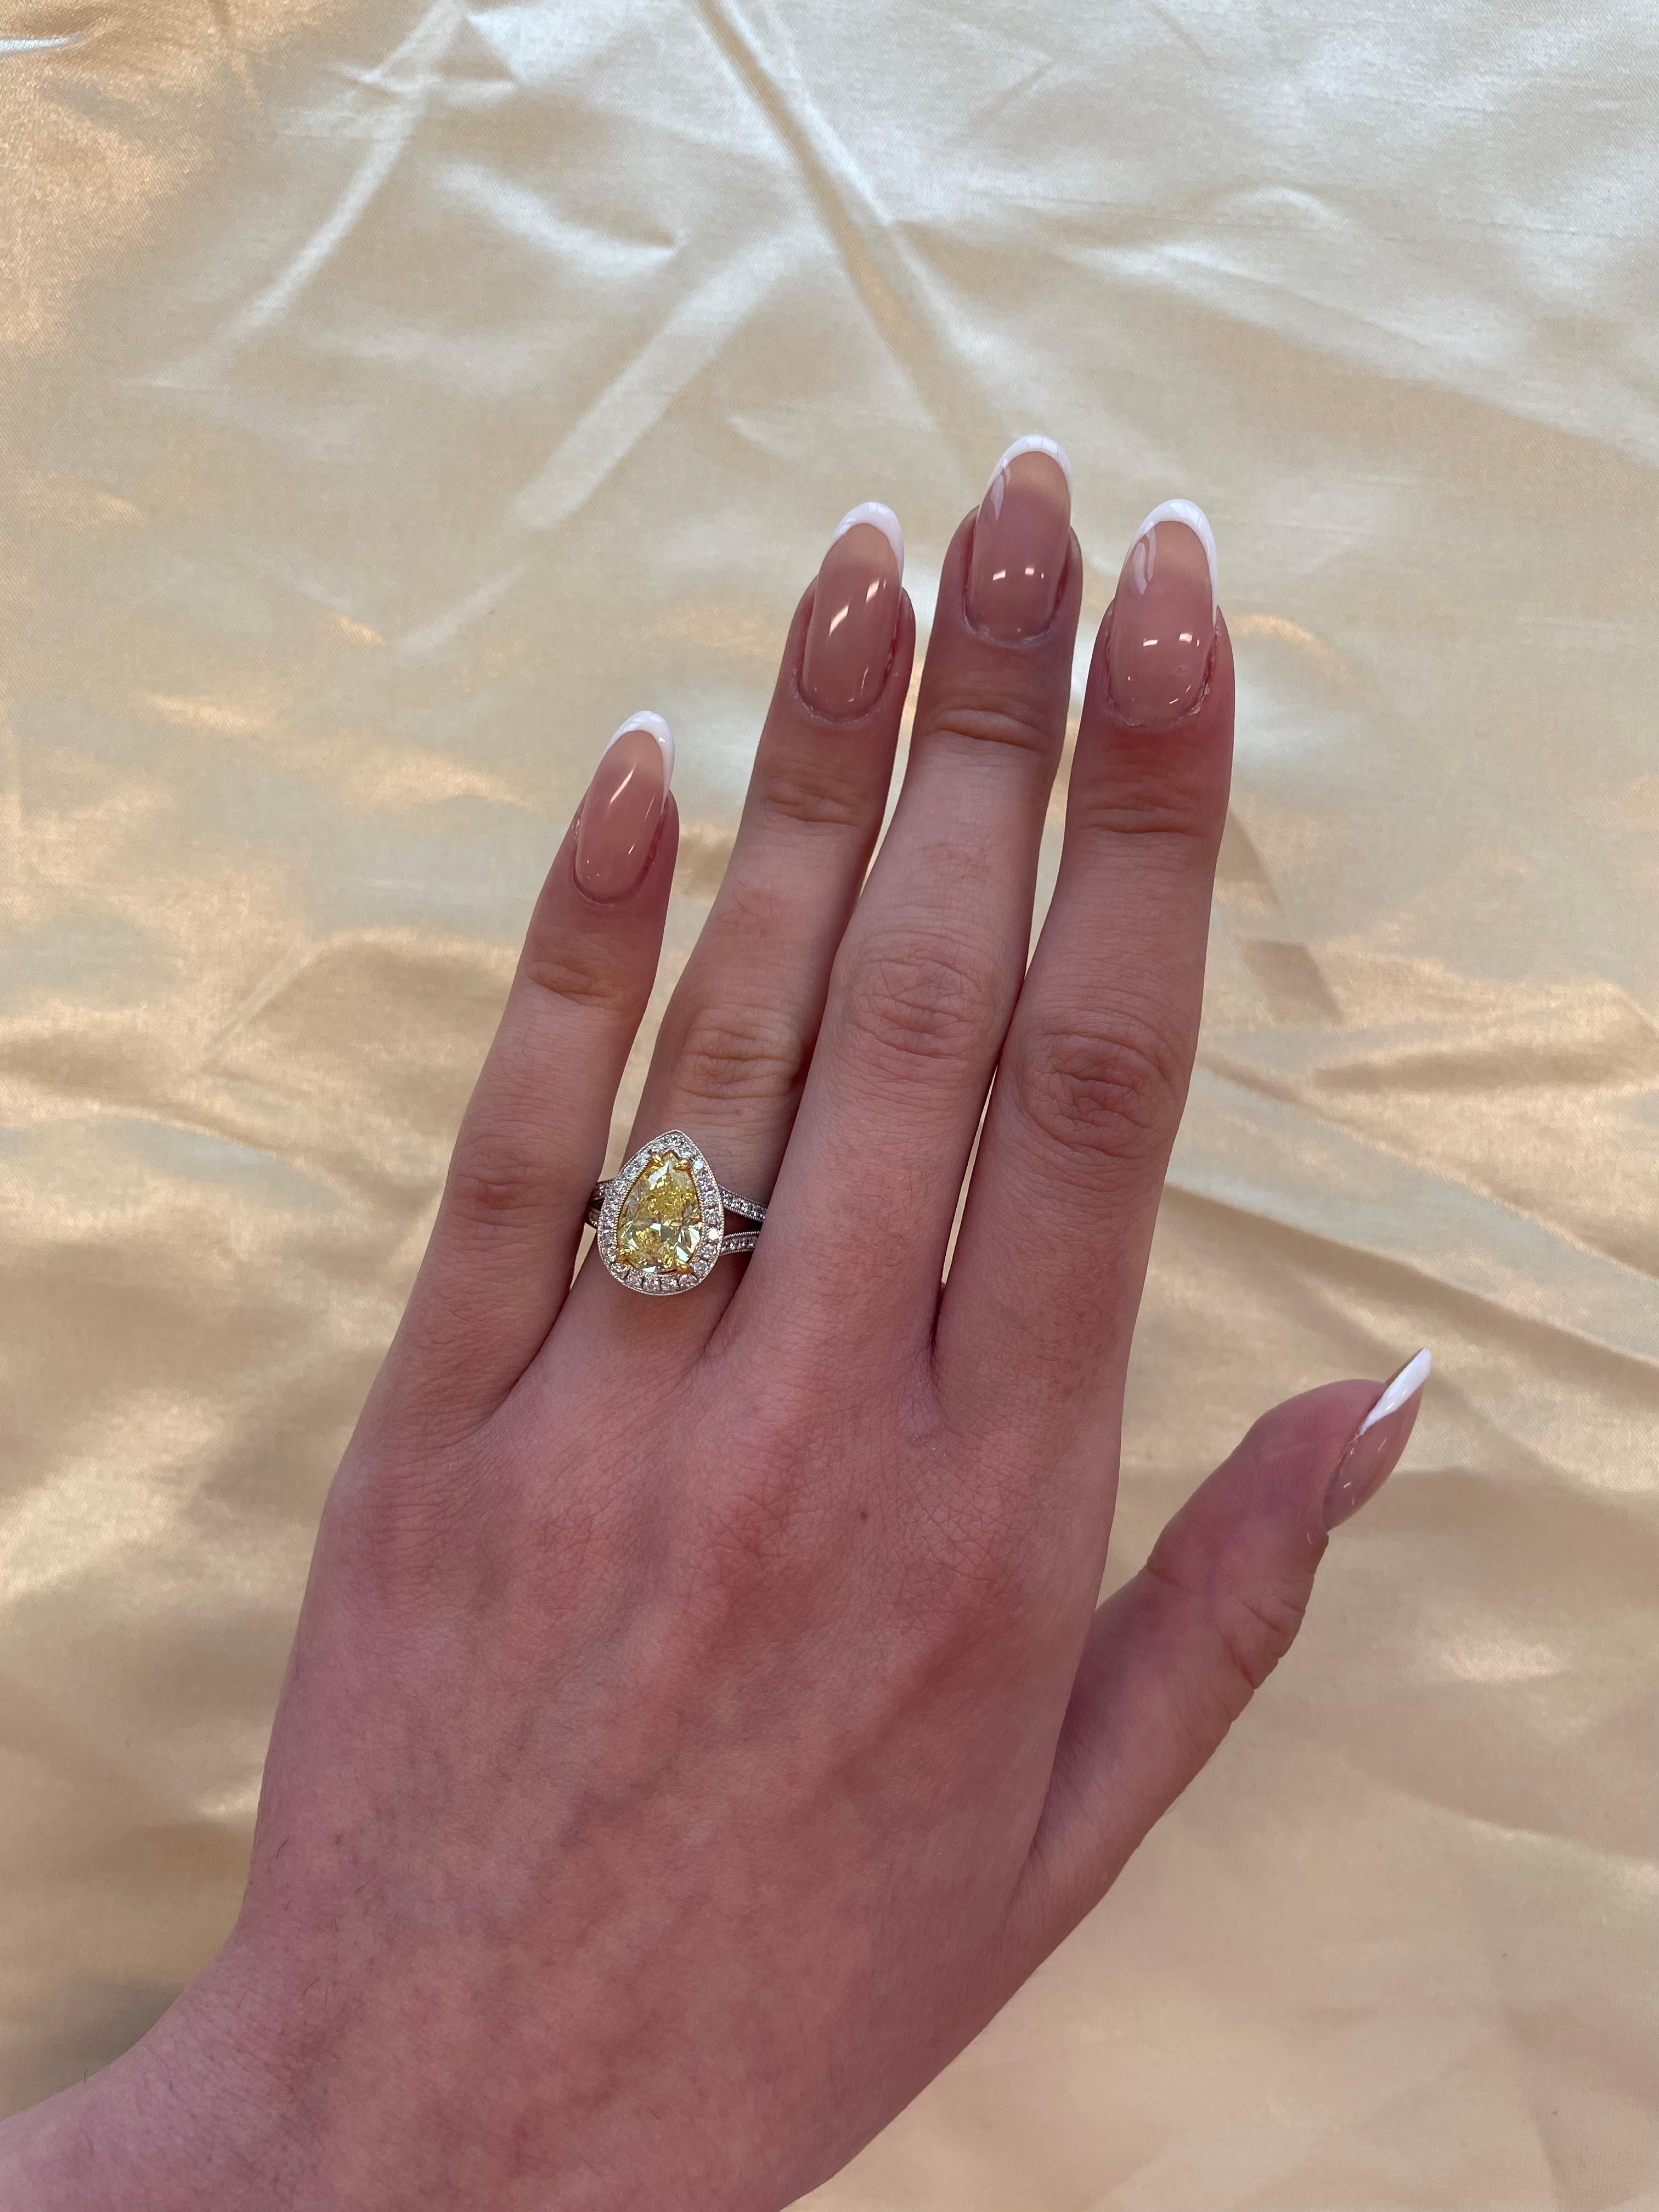 Stunning modern EGL certified yellow diamond with halo ring, two-tone 18k yellow and white gold. By Alexander Beverly Hills
3.07 carats total diamond weight.
2.50 carat pear cut Fancy Vivid Yellow color and I1 clarity diamond, EGL graded.